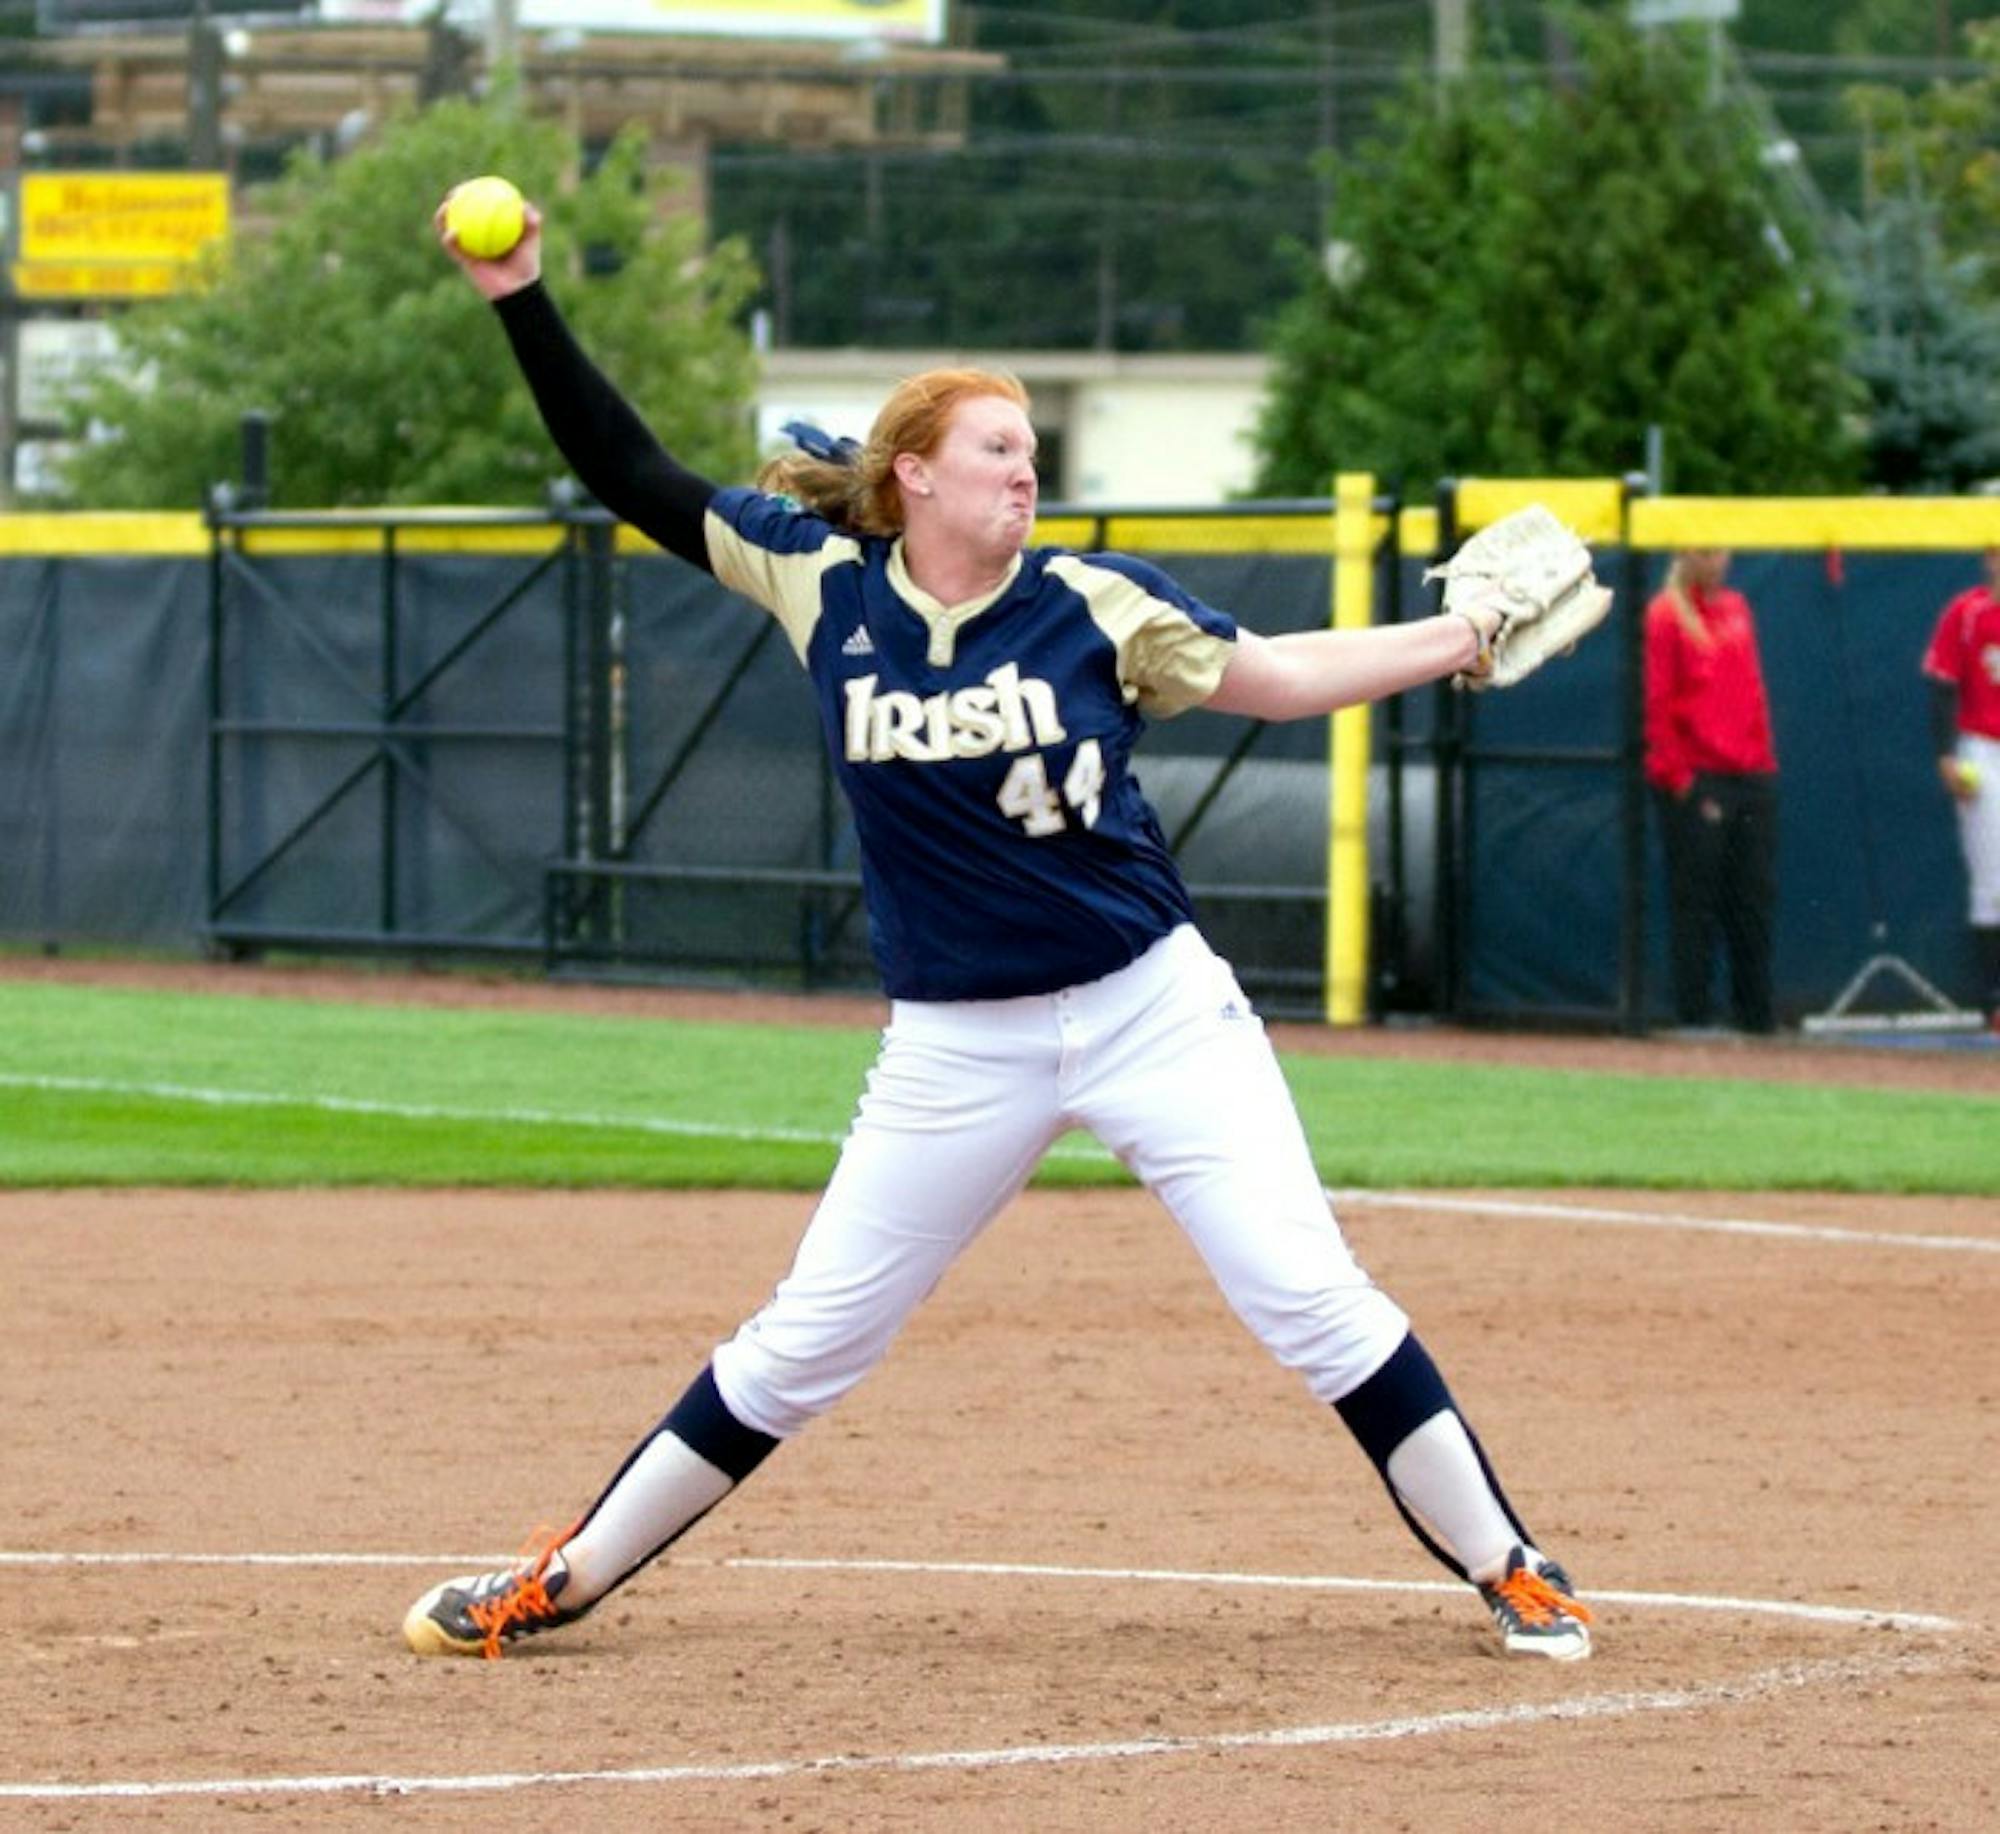 Senior pitcher Laura Winter winds up in a fall exhibition against Illinois St. on Sept. 15.